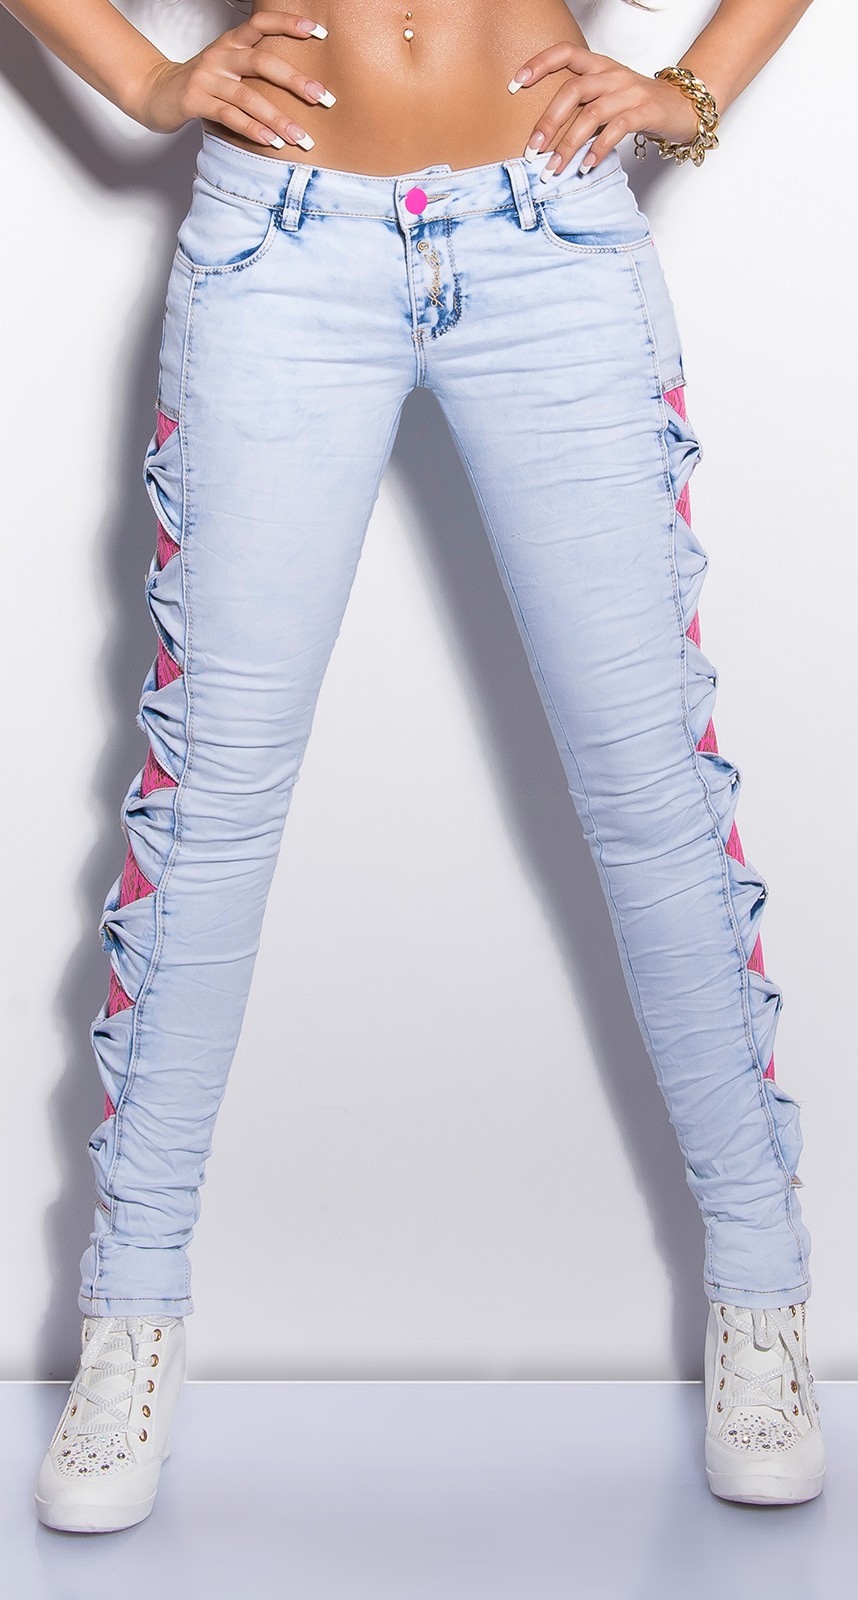 ooKouCka skinny jeans with lace Color JEANSBLUE Size 36 0000K600 155 JEANSBLAU 8 Copy